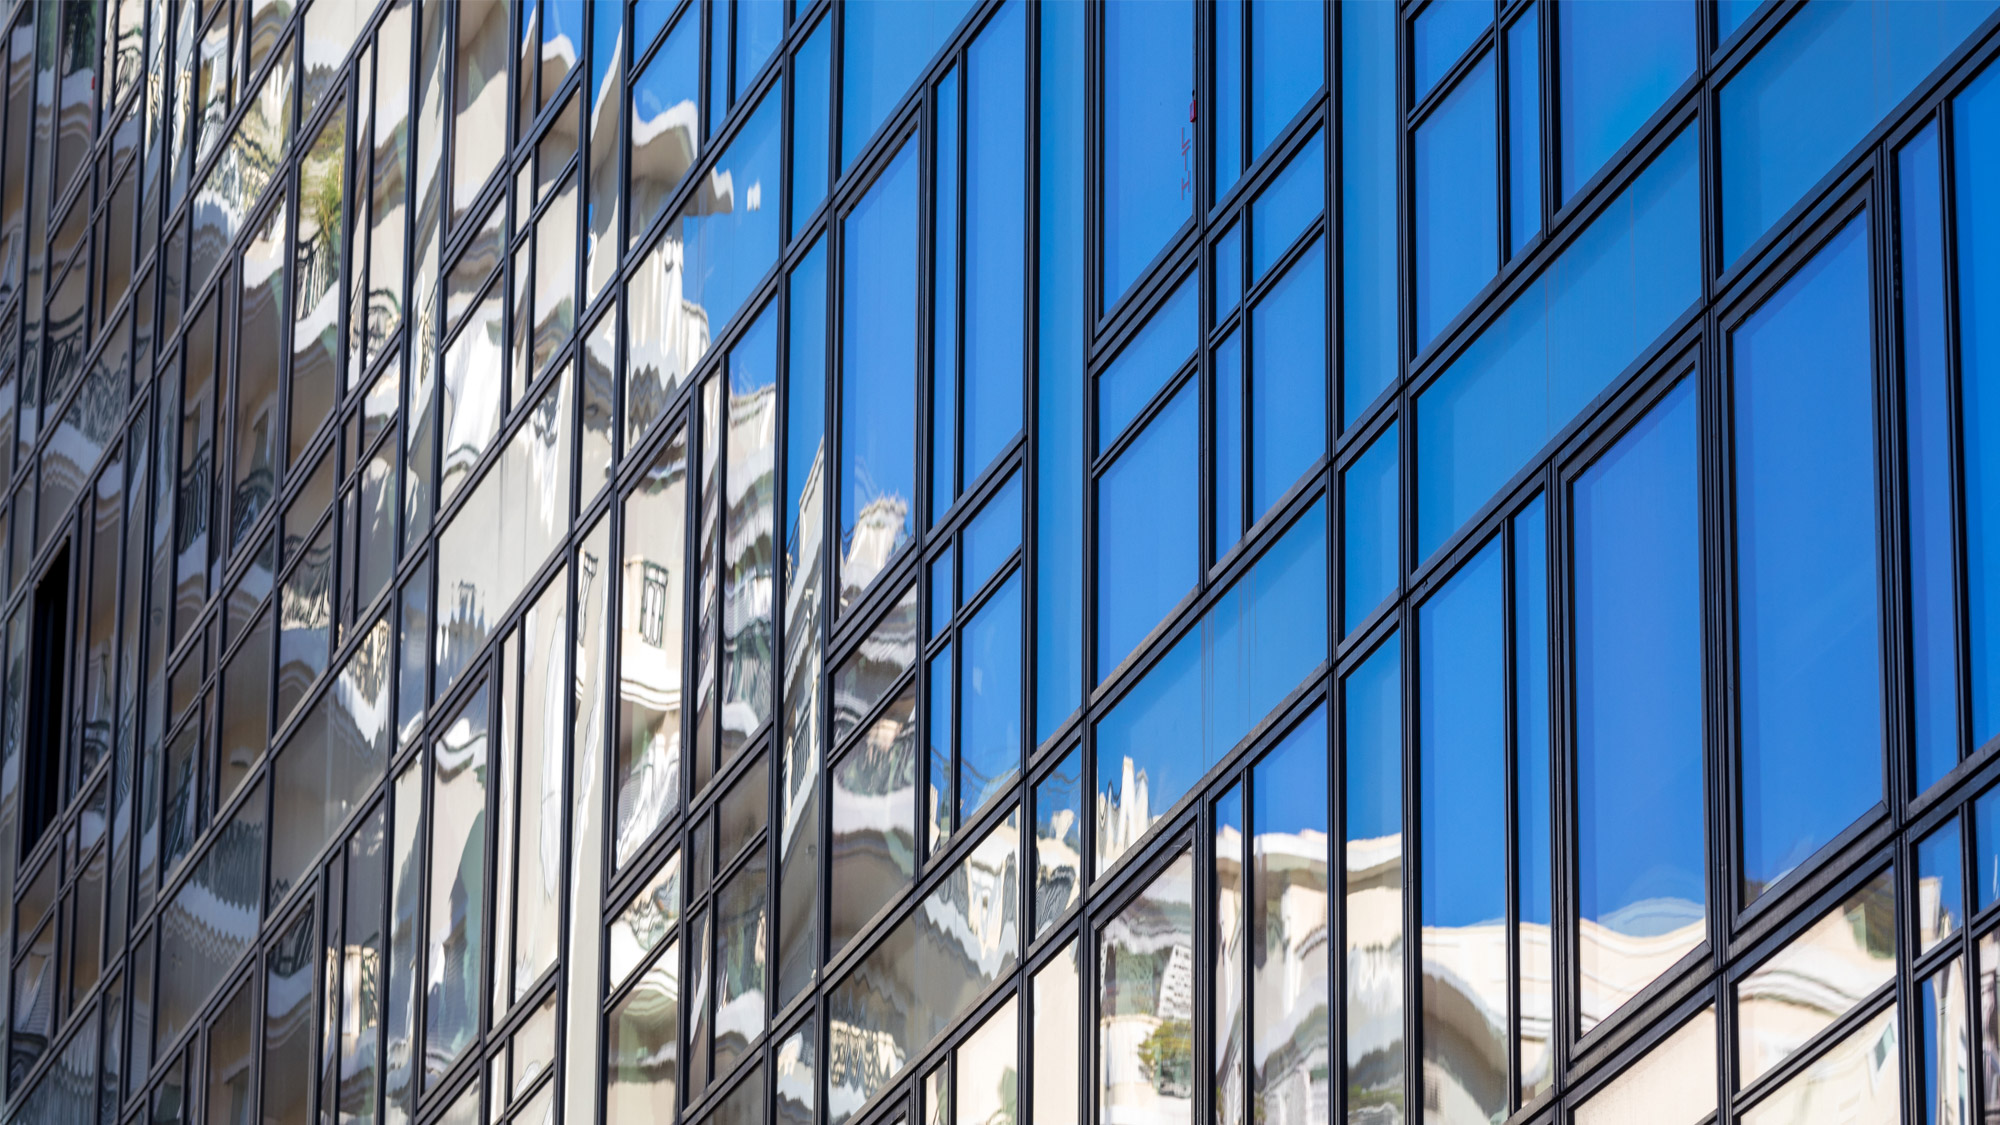 One of the latest property developments in monaco - One Monte Carlo with its glass facade